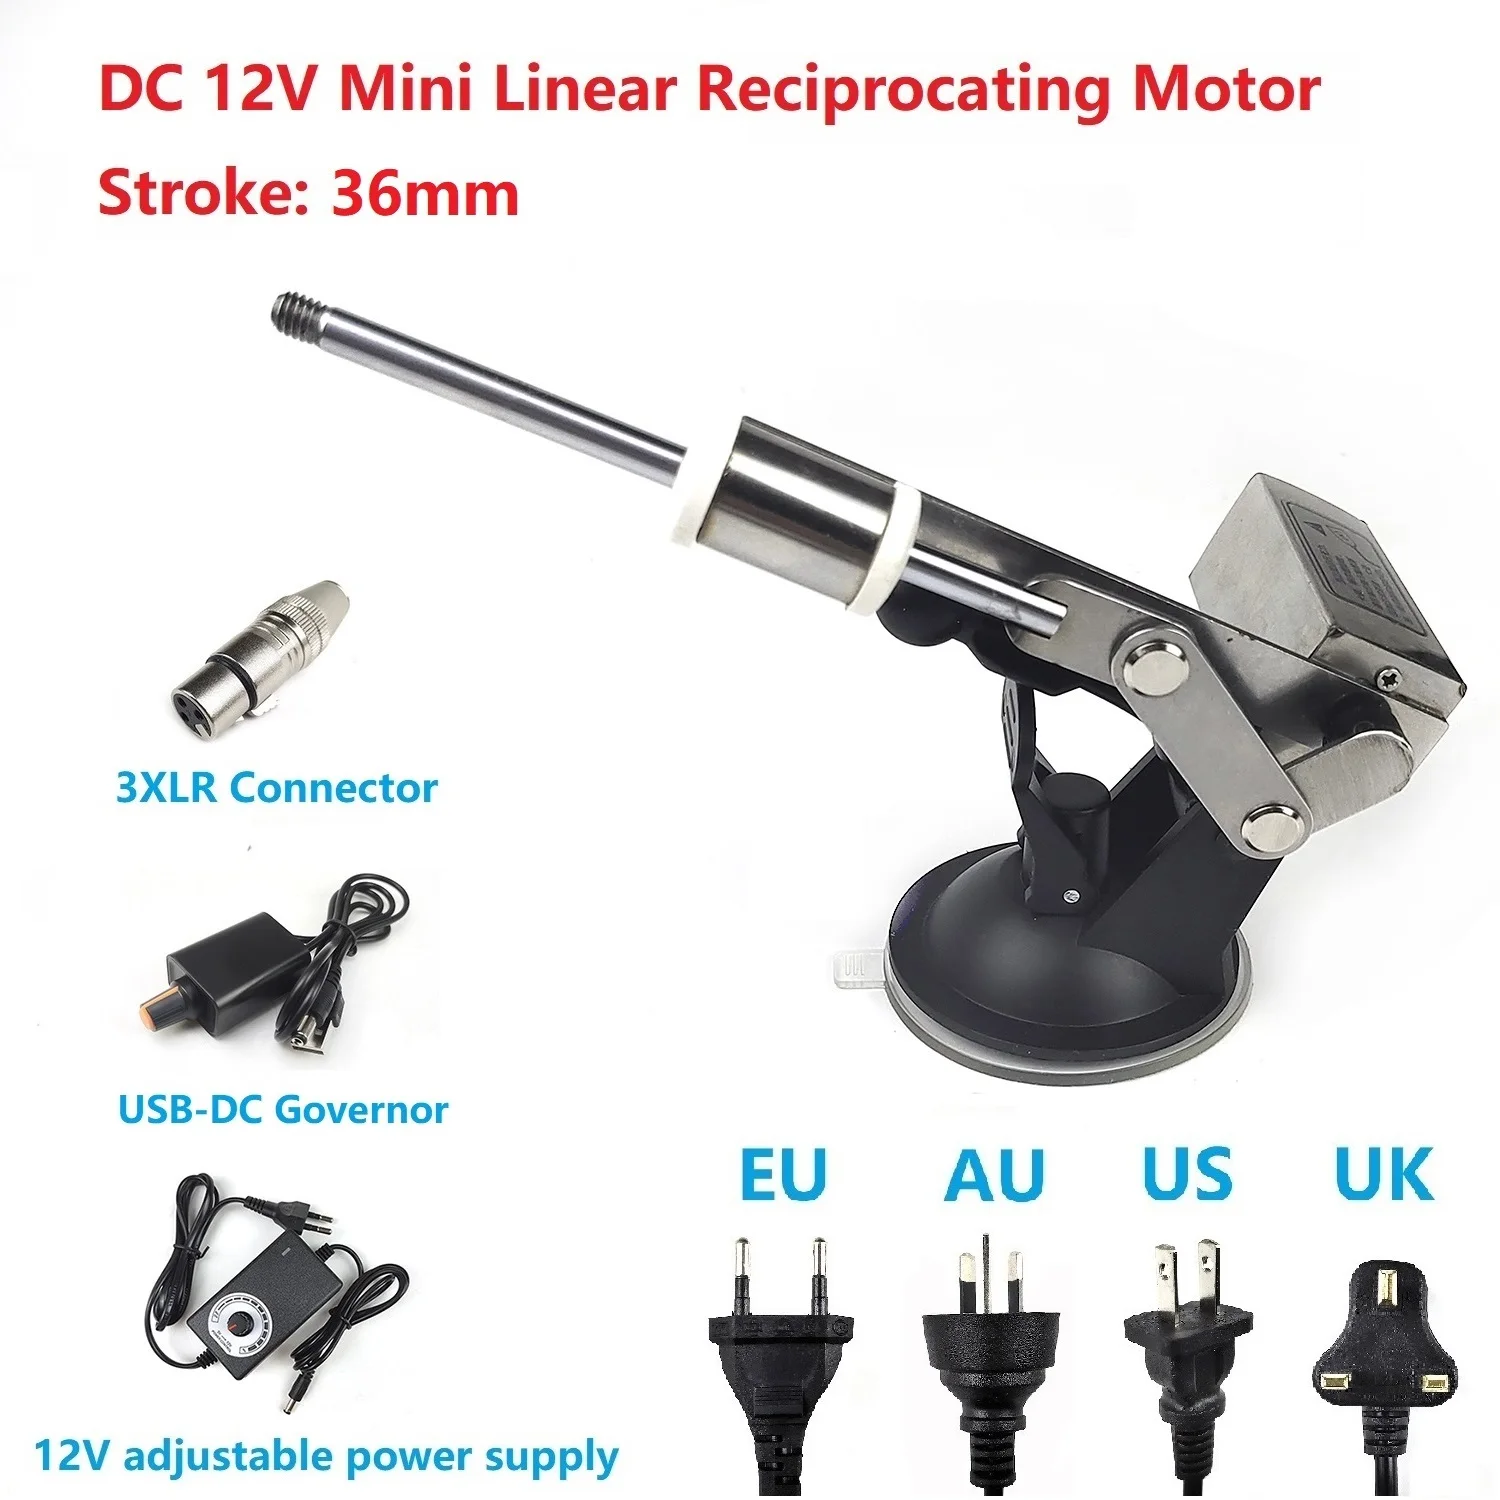 

12V 5V Mobile Power Supply USB Charger Mini Telescopic Linear Actuator 3XLR Connector 36mm Stroke Reciprocating Mechanism Motor